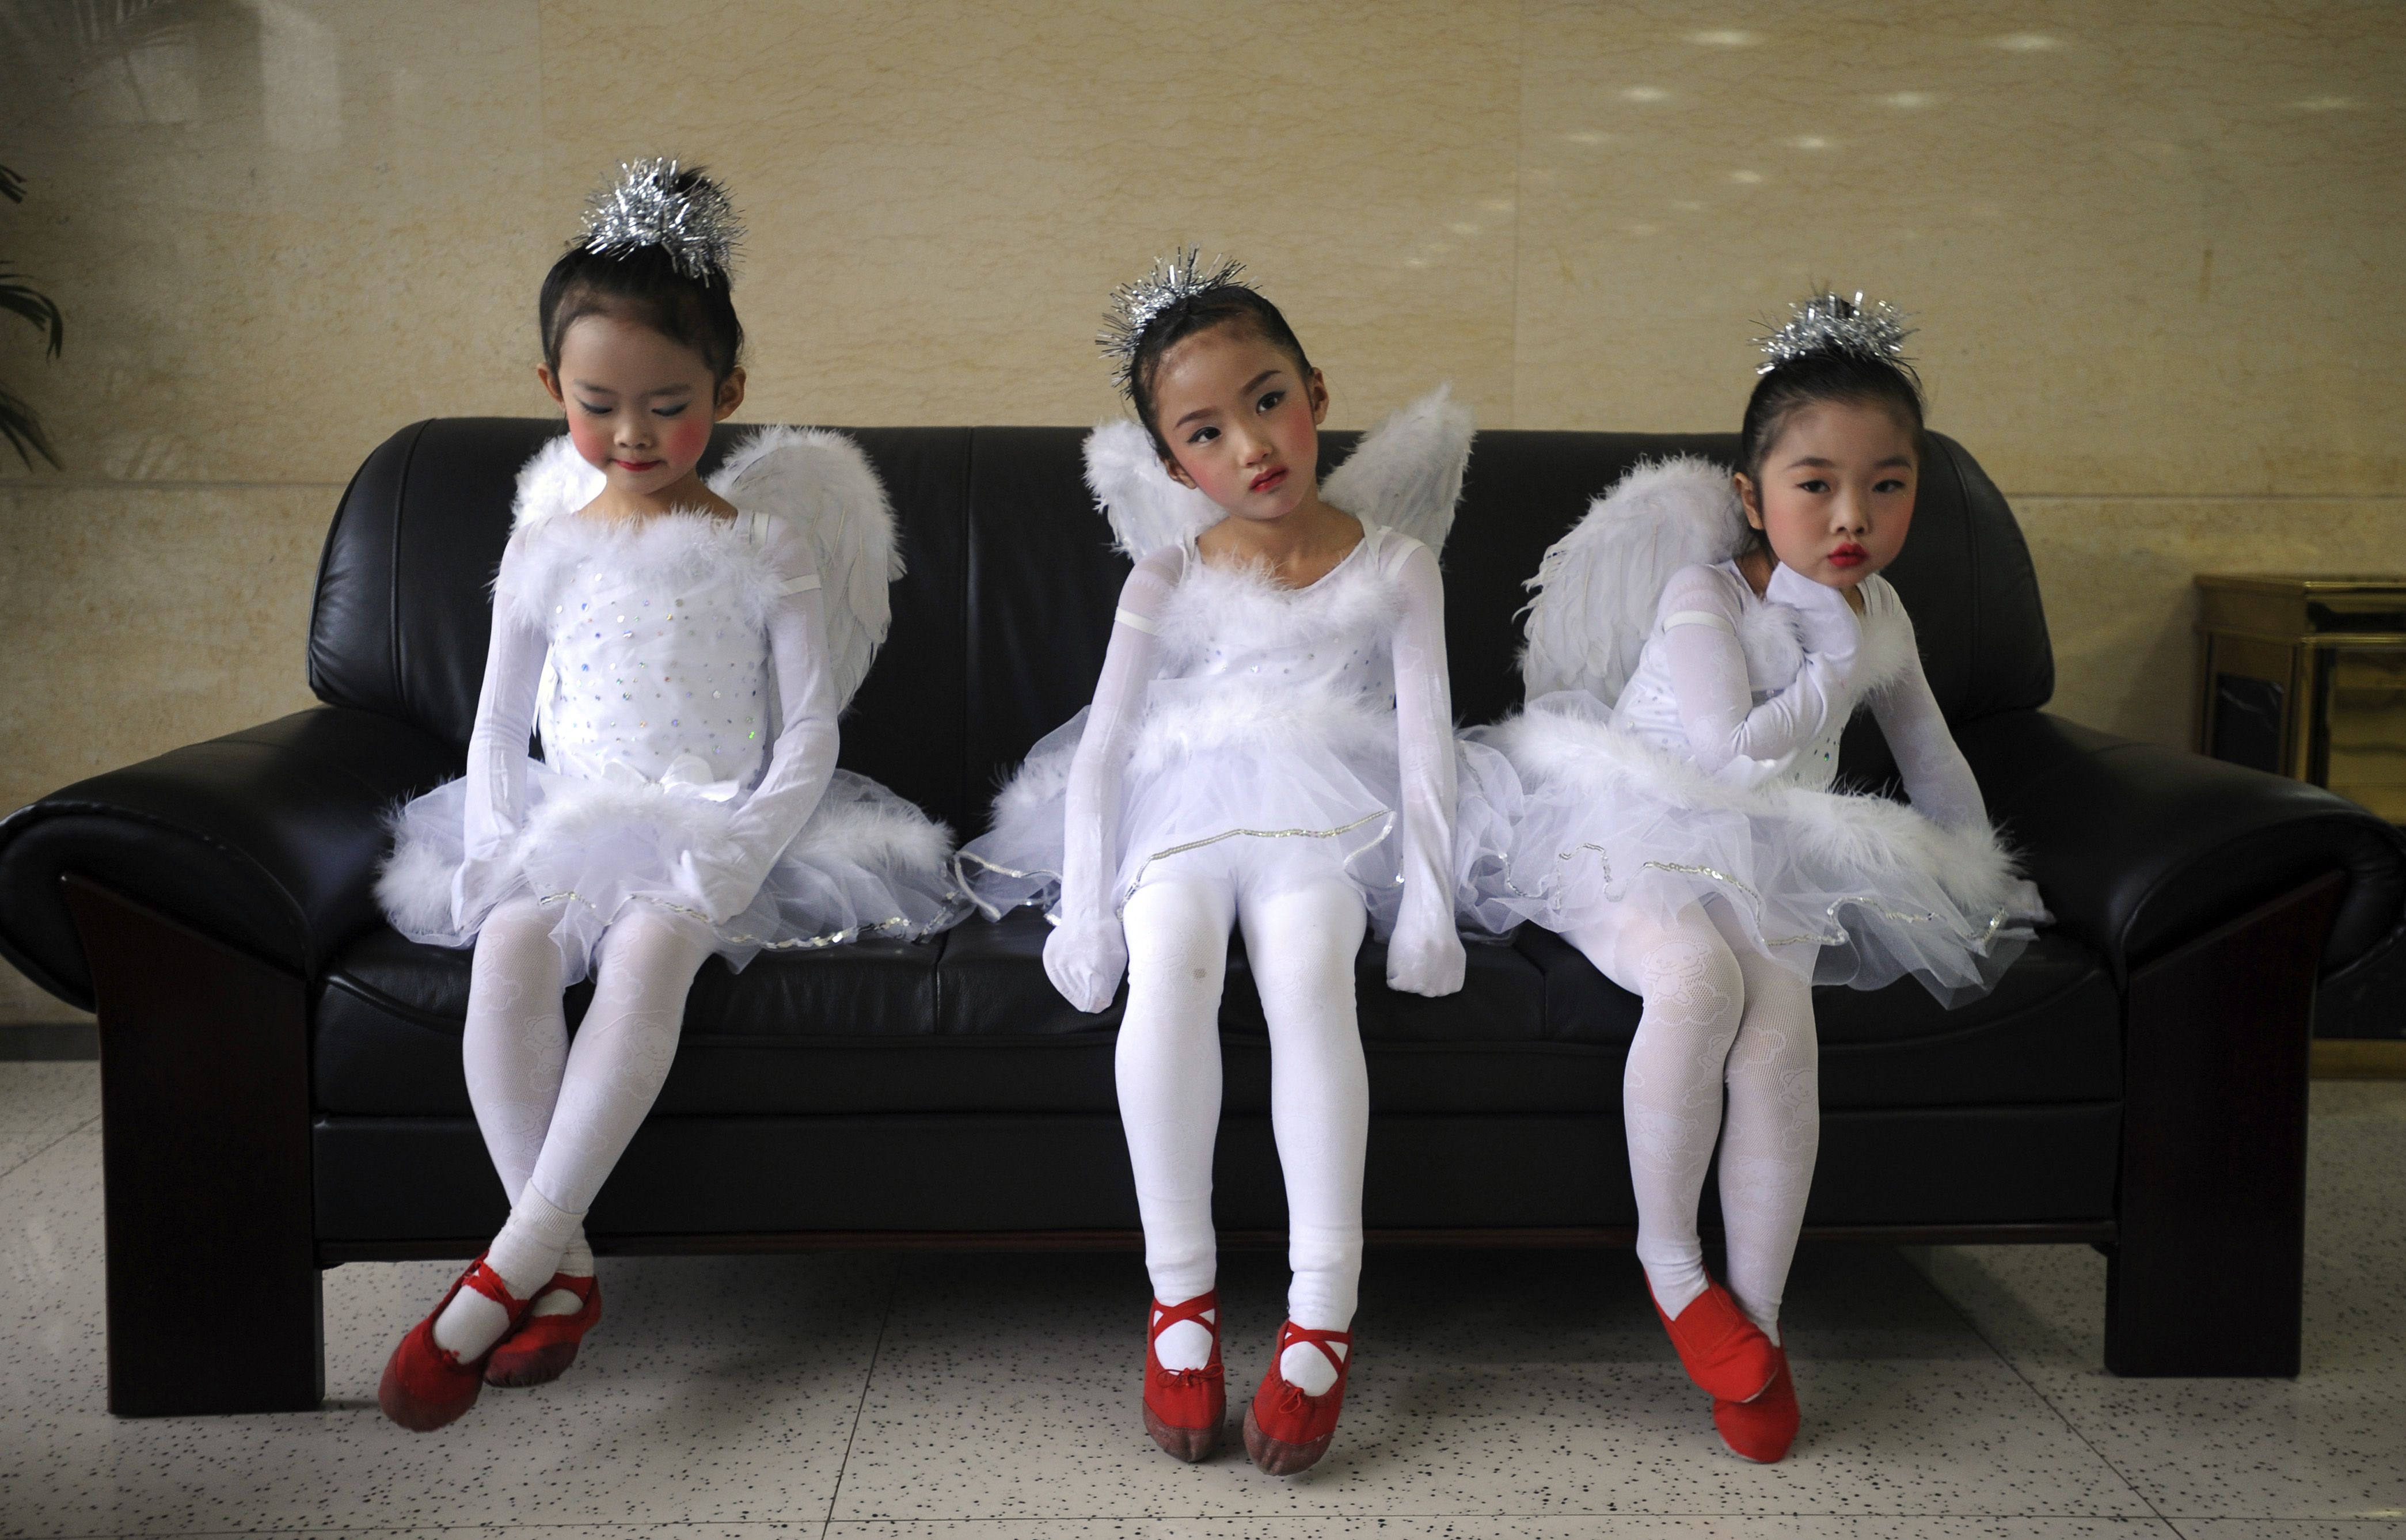 Children wait to perform ballet for a promotional event in Kunming